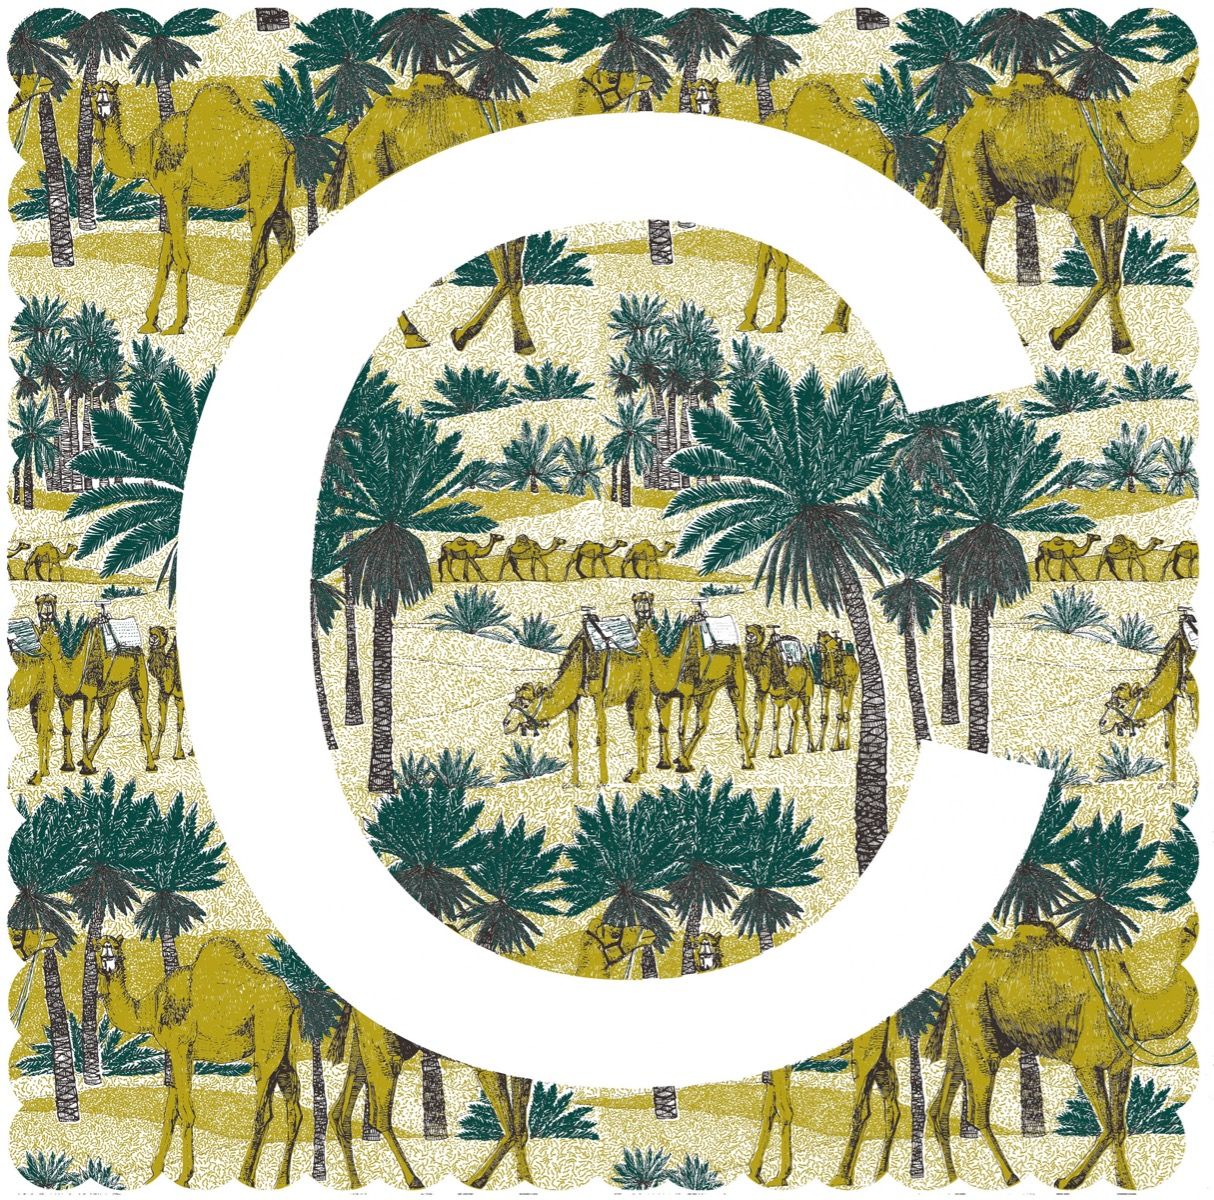 C is for Camel (large) by Clare Halifax